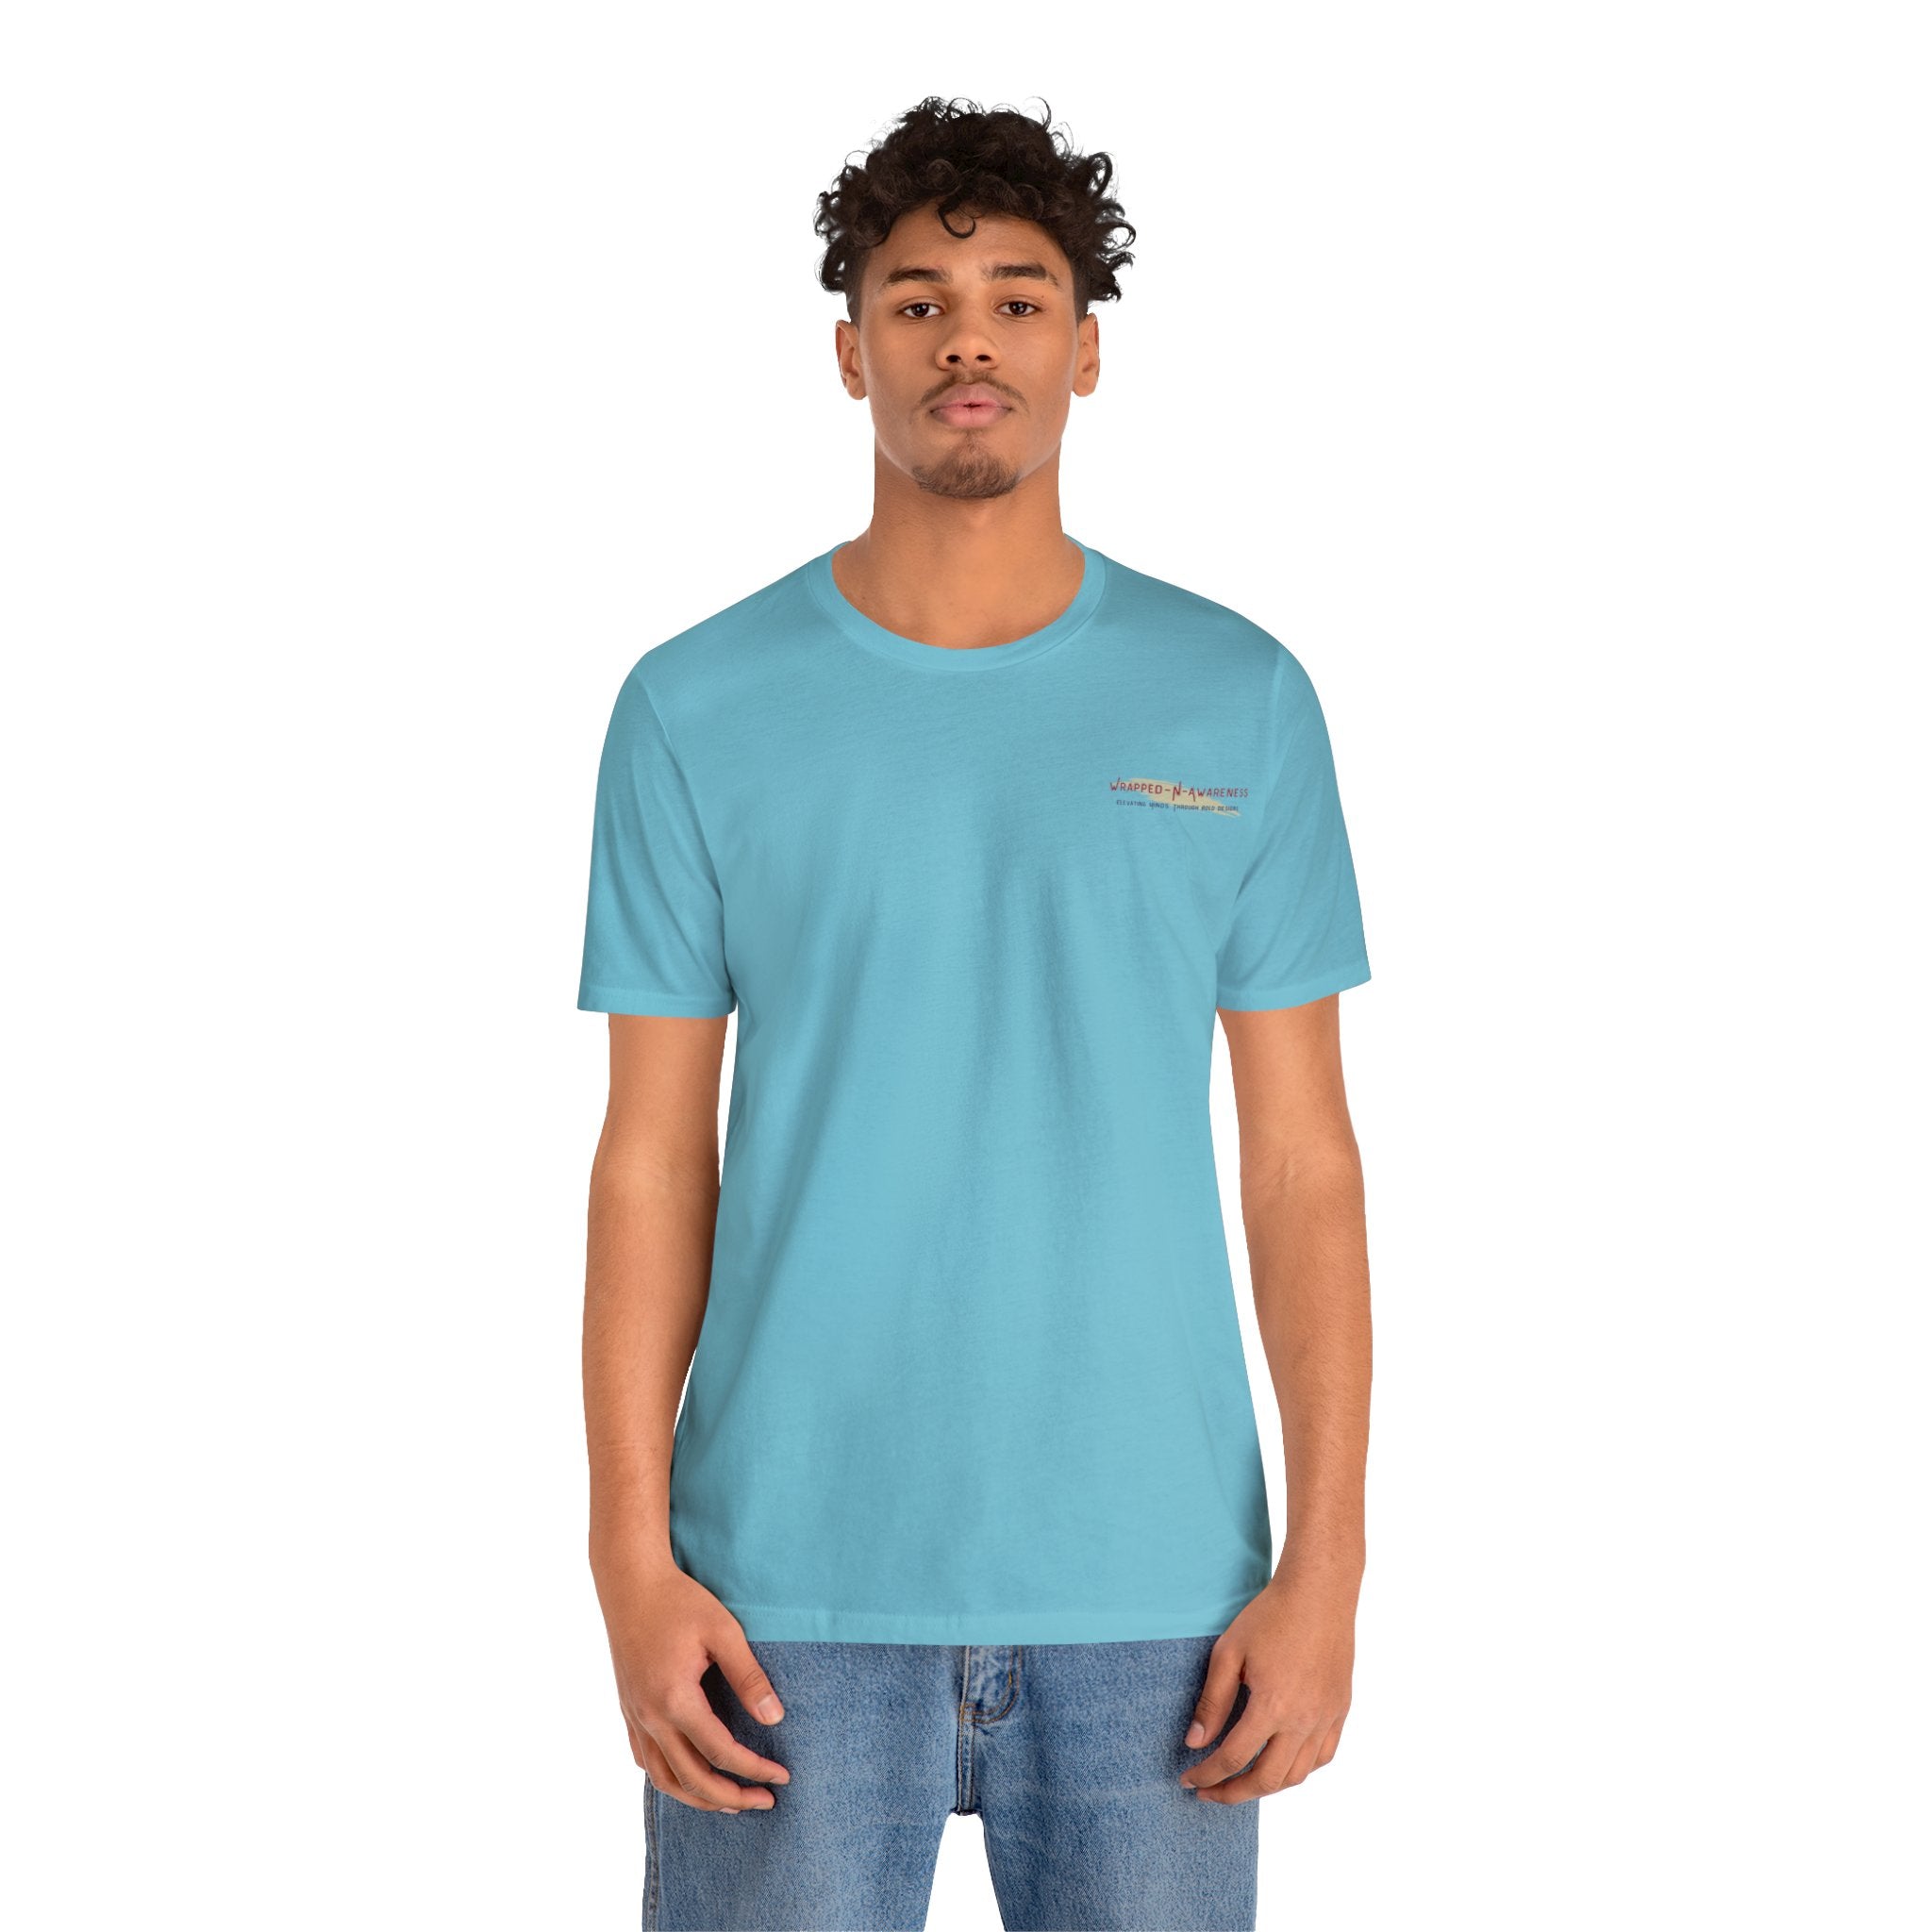 Inspire Growth Jersey Tee - Bella+Canvas 3001 Turquoise Airlume Cotton Bella+Canvas 3001 Crew Neckline Jersey Short Sleeve Lightweight Fabric Mental Health Support Retail Fit Tear-away Label Tee Unisex Tee T-Shirt 14541339511137129657_2048 Printify